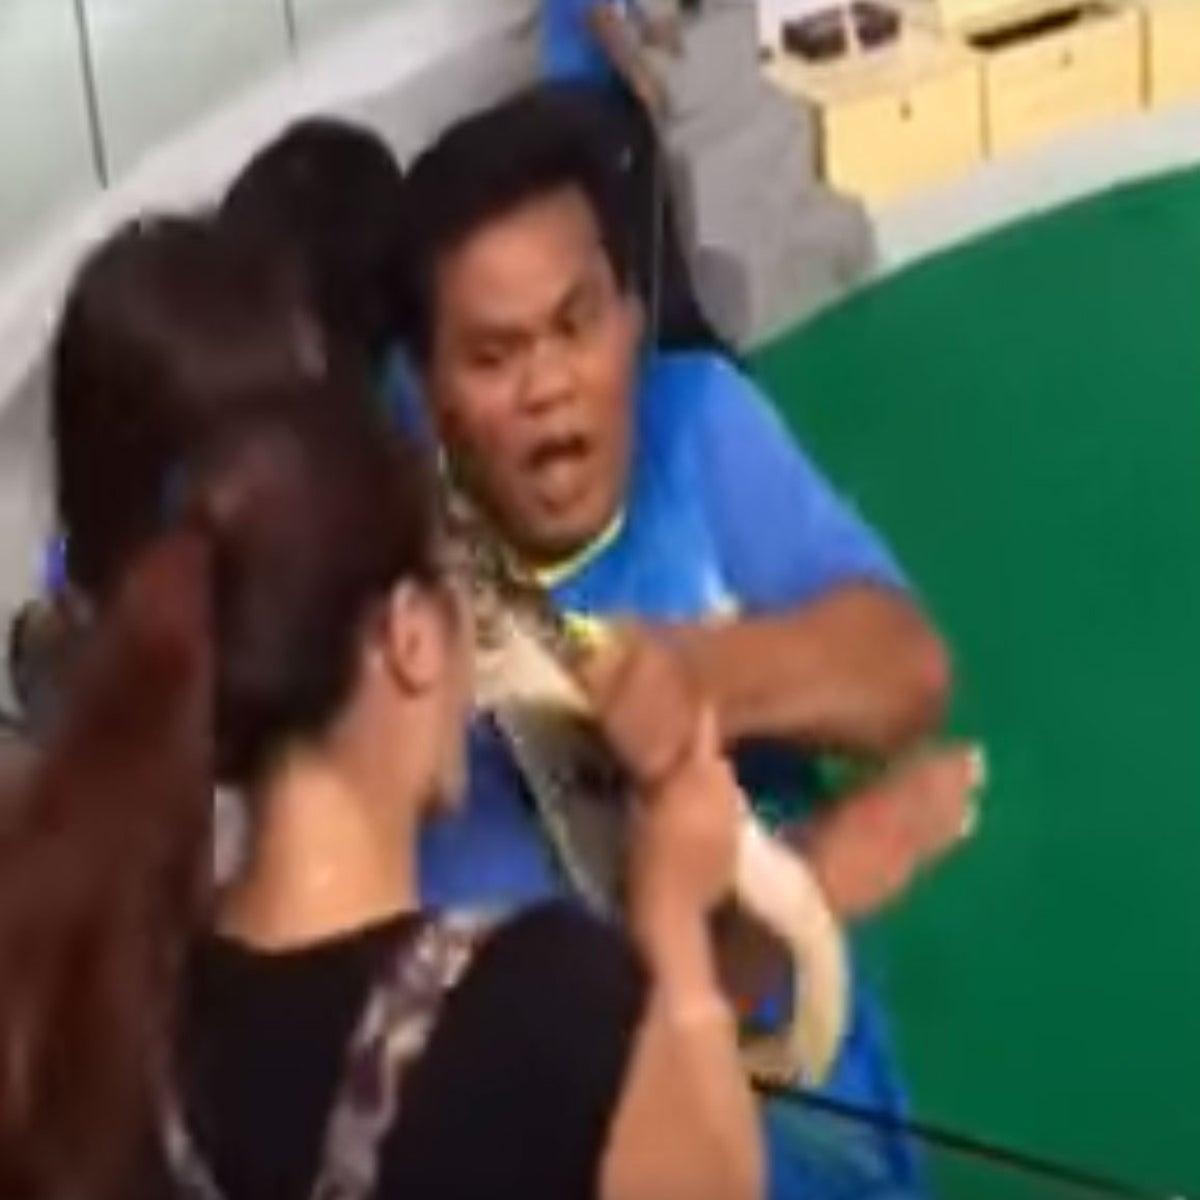 A tourist takes a bite from the chest of a Thai woman as they